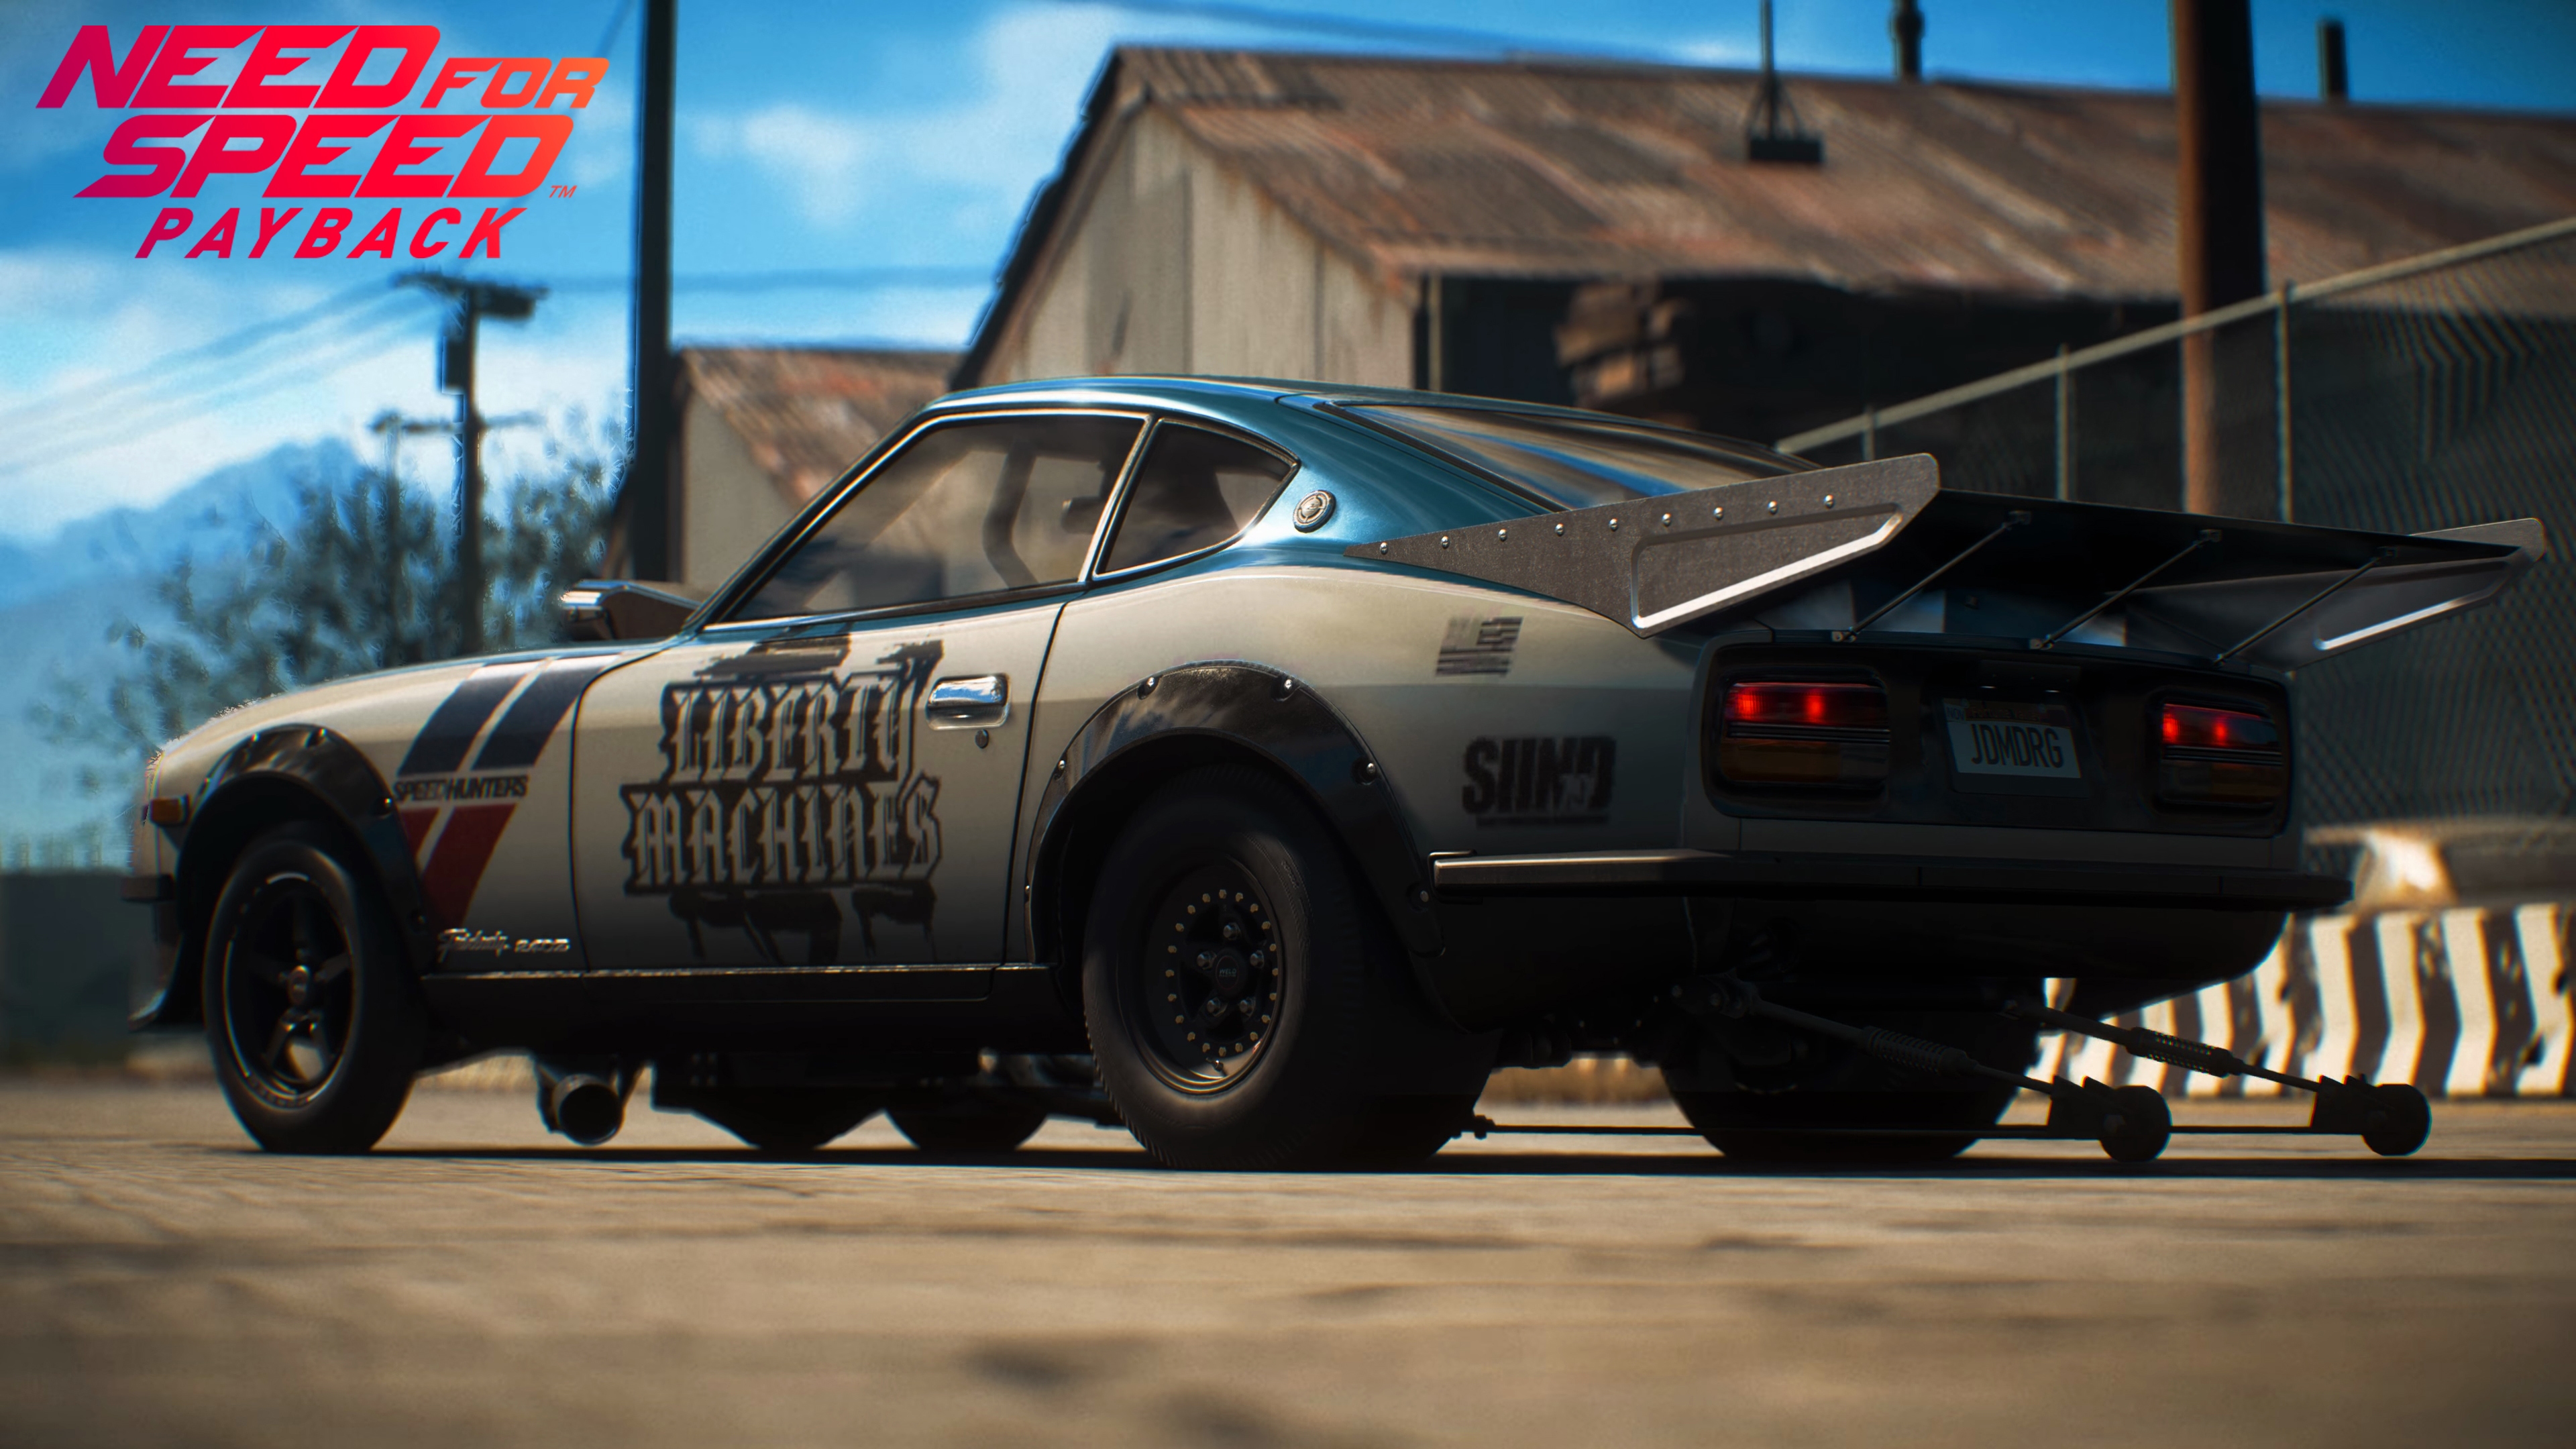 video game, need for speed payback, car, need for speed, nissan 240zg, nissan